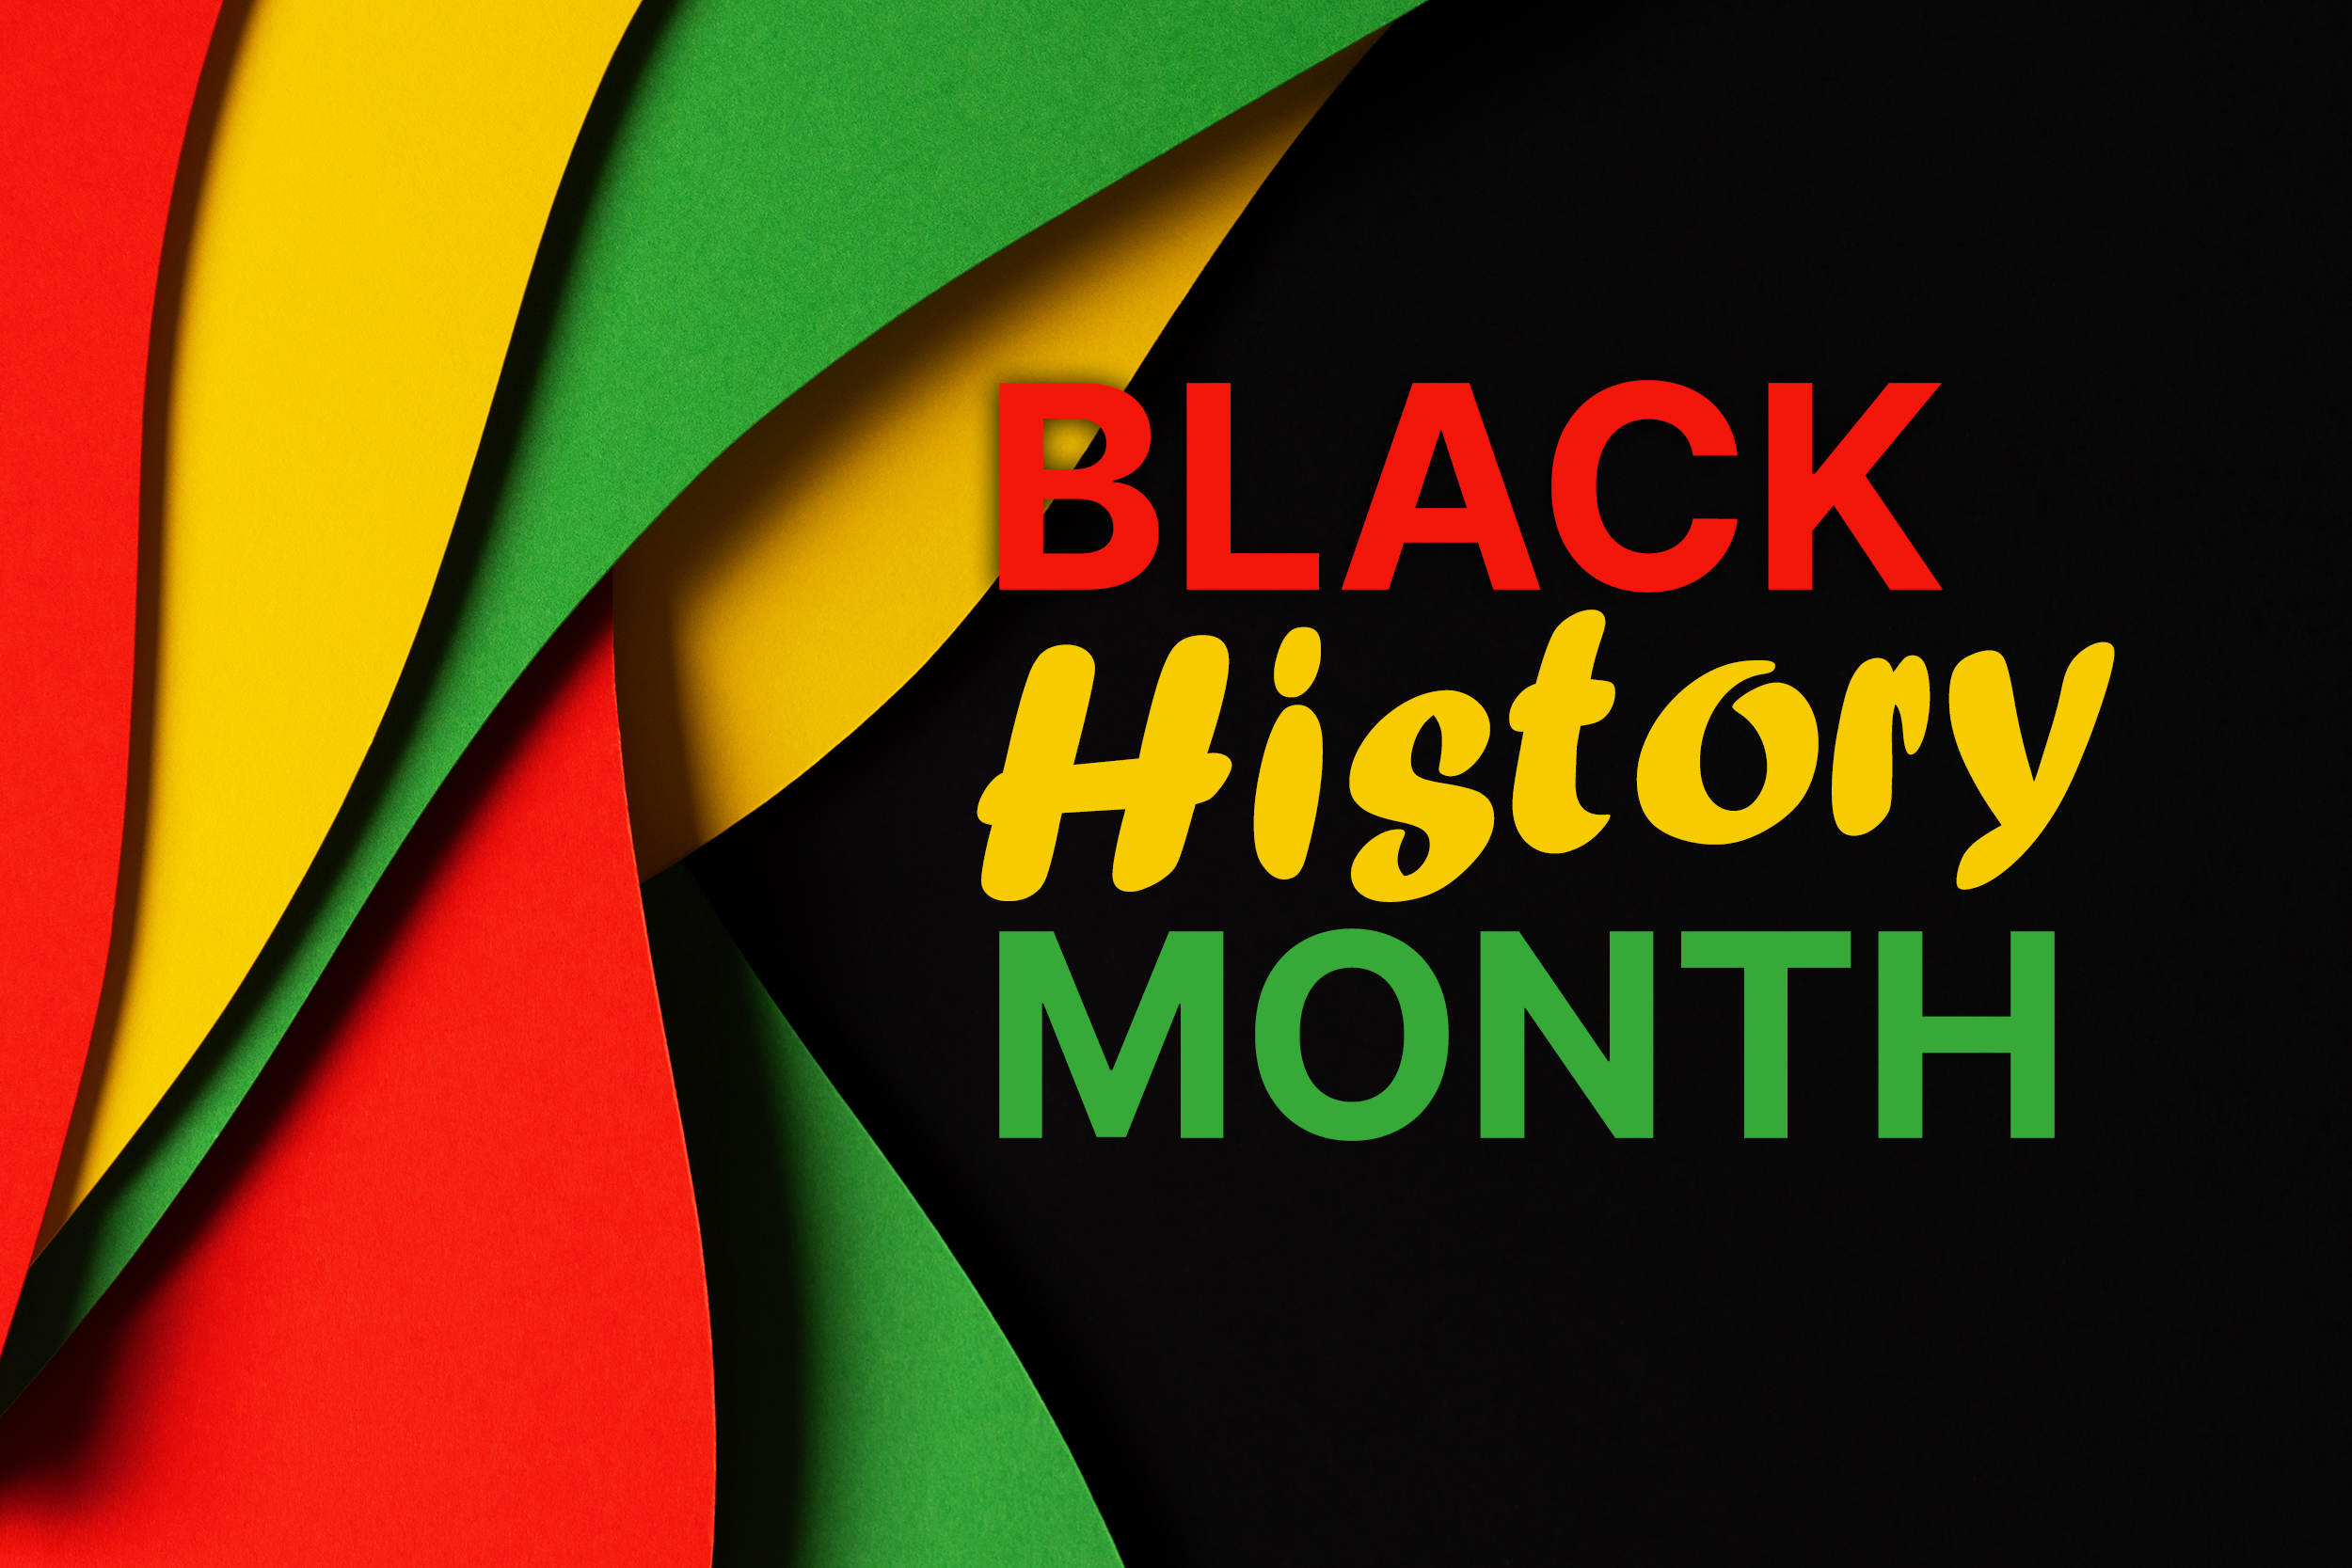 Black History Month in yellow, green, and red writing with a black background